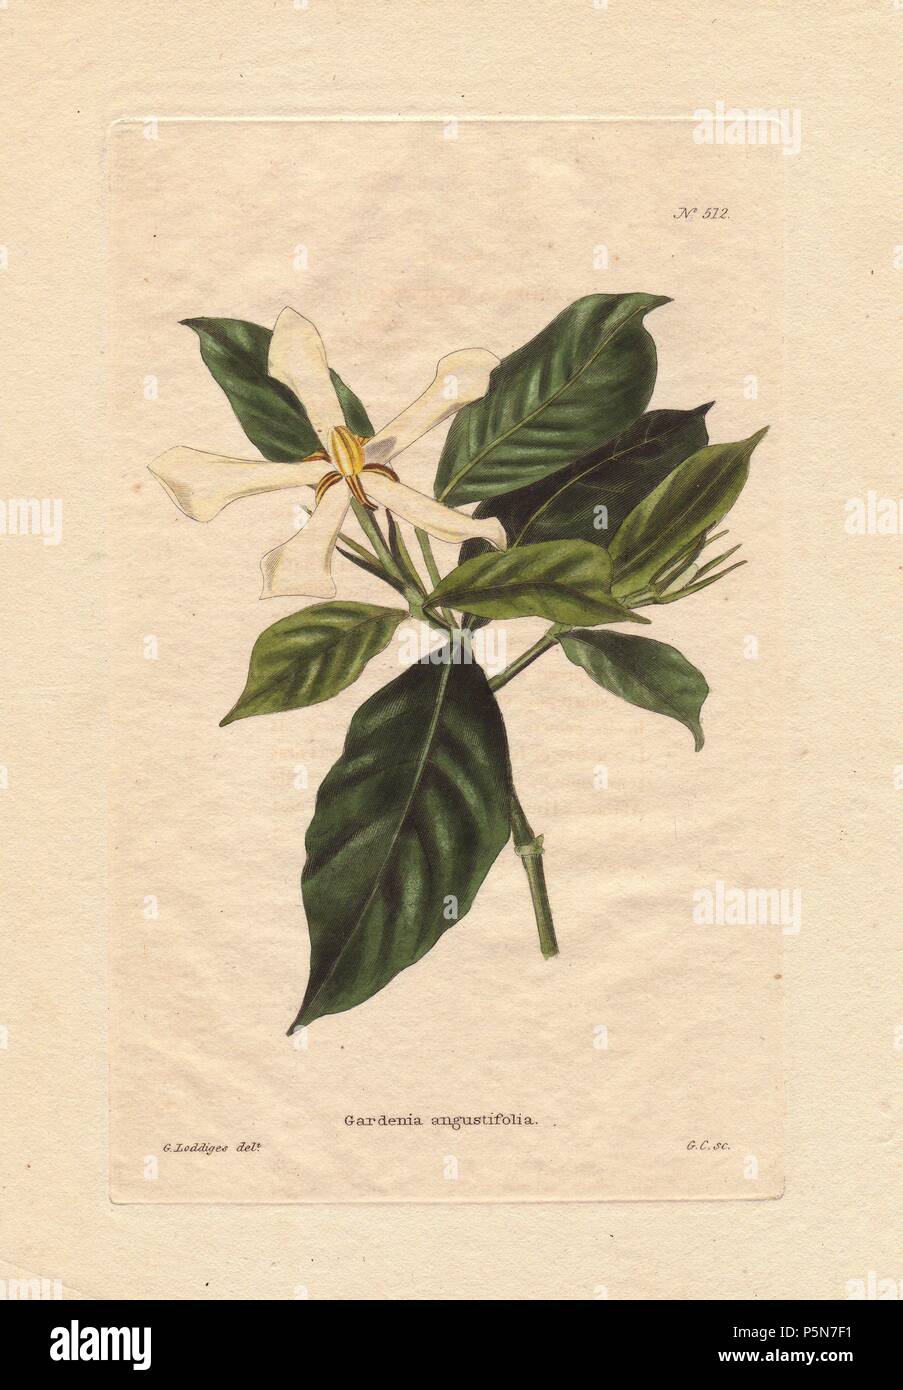 Gardenia angustifolia. . White gardenia with narrow flowers and dark green foliage. 'It is a native of India and we believe was first sent home by the late Dr. Roxburgh to Sir Abraham Hume.' Named for Dr. Alexander Garden (17301791), a Scottish physician, naturalist and zoologist.. . Drawn by George Loddiges, engraved by G. Cooke. . . Conrad Loddiges and Sons published an illustrated catalogue of the nursery's plants entitled the Botanical Cabinet. The monthly magazine featured 10 hand-coloured illustrations and ran from 1817 to 1833 to total 2,000 plates. The publication introduced many exqu Stock Photo